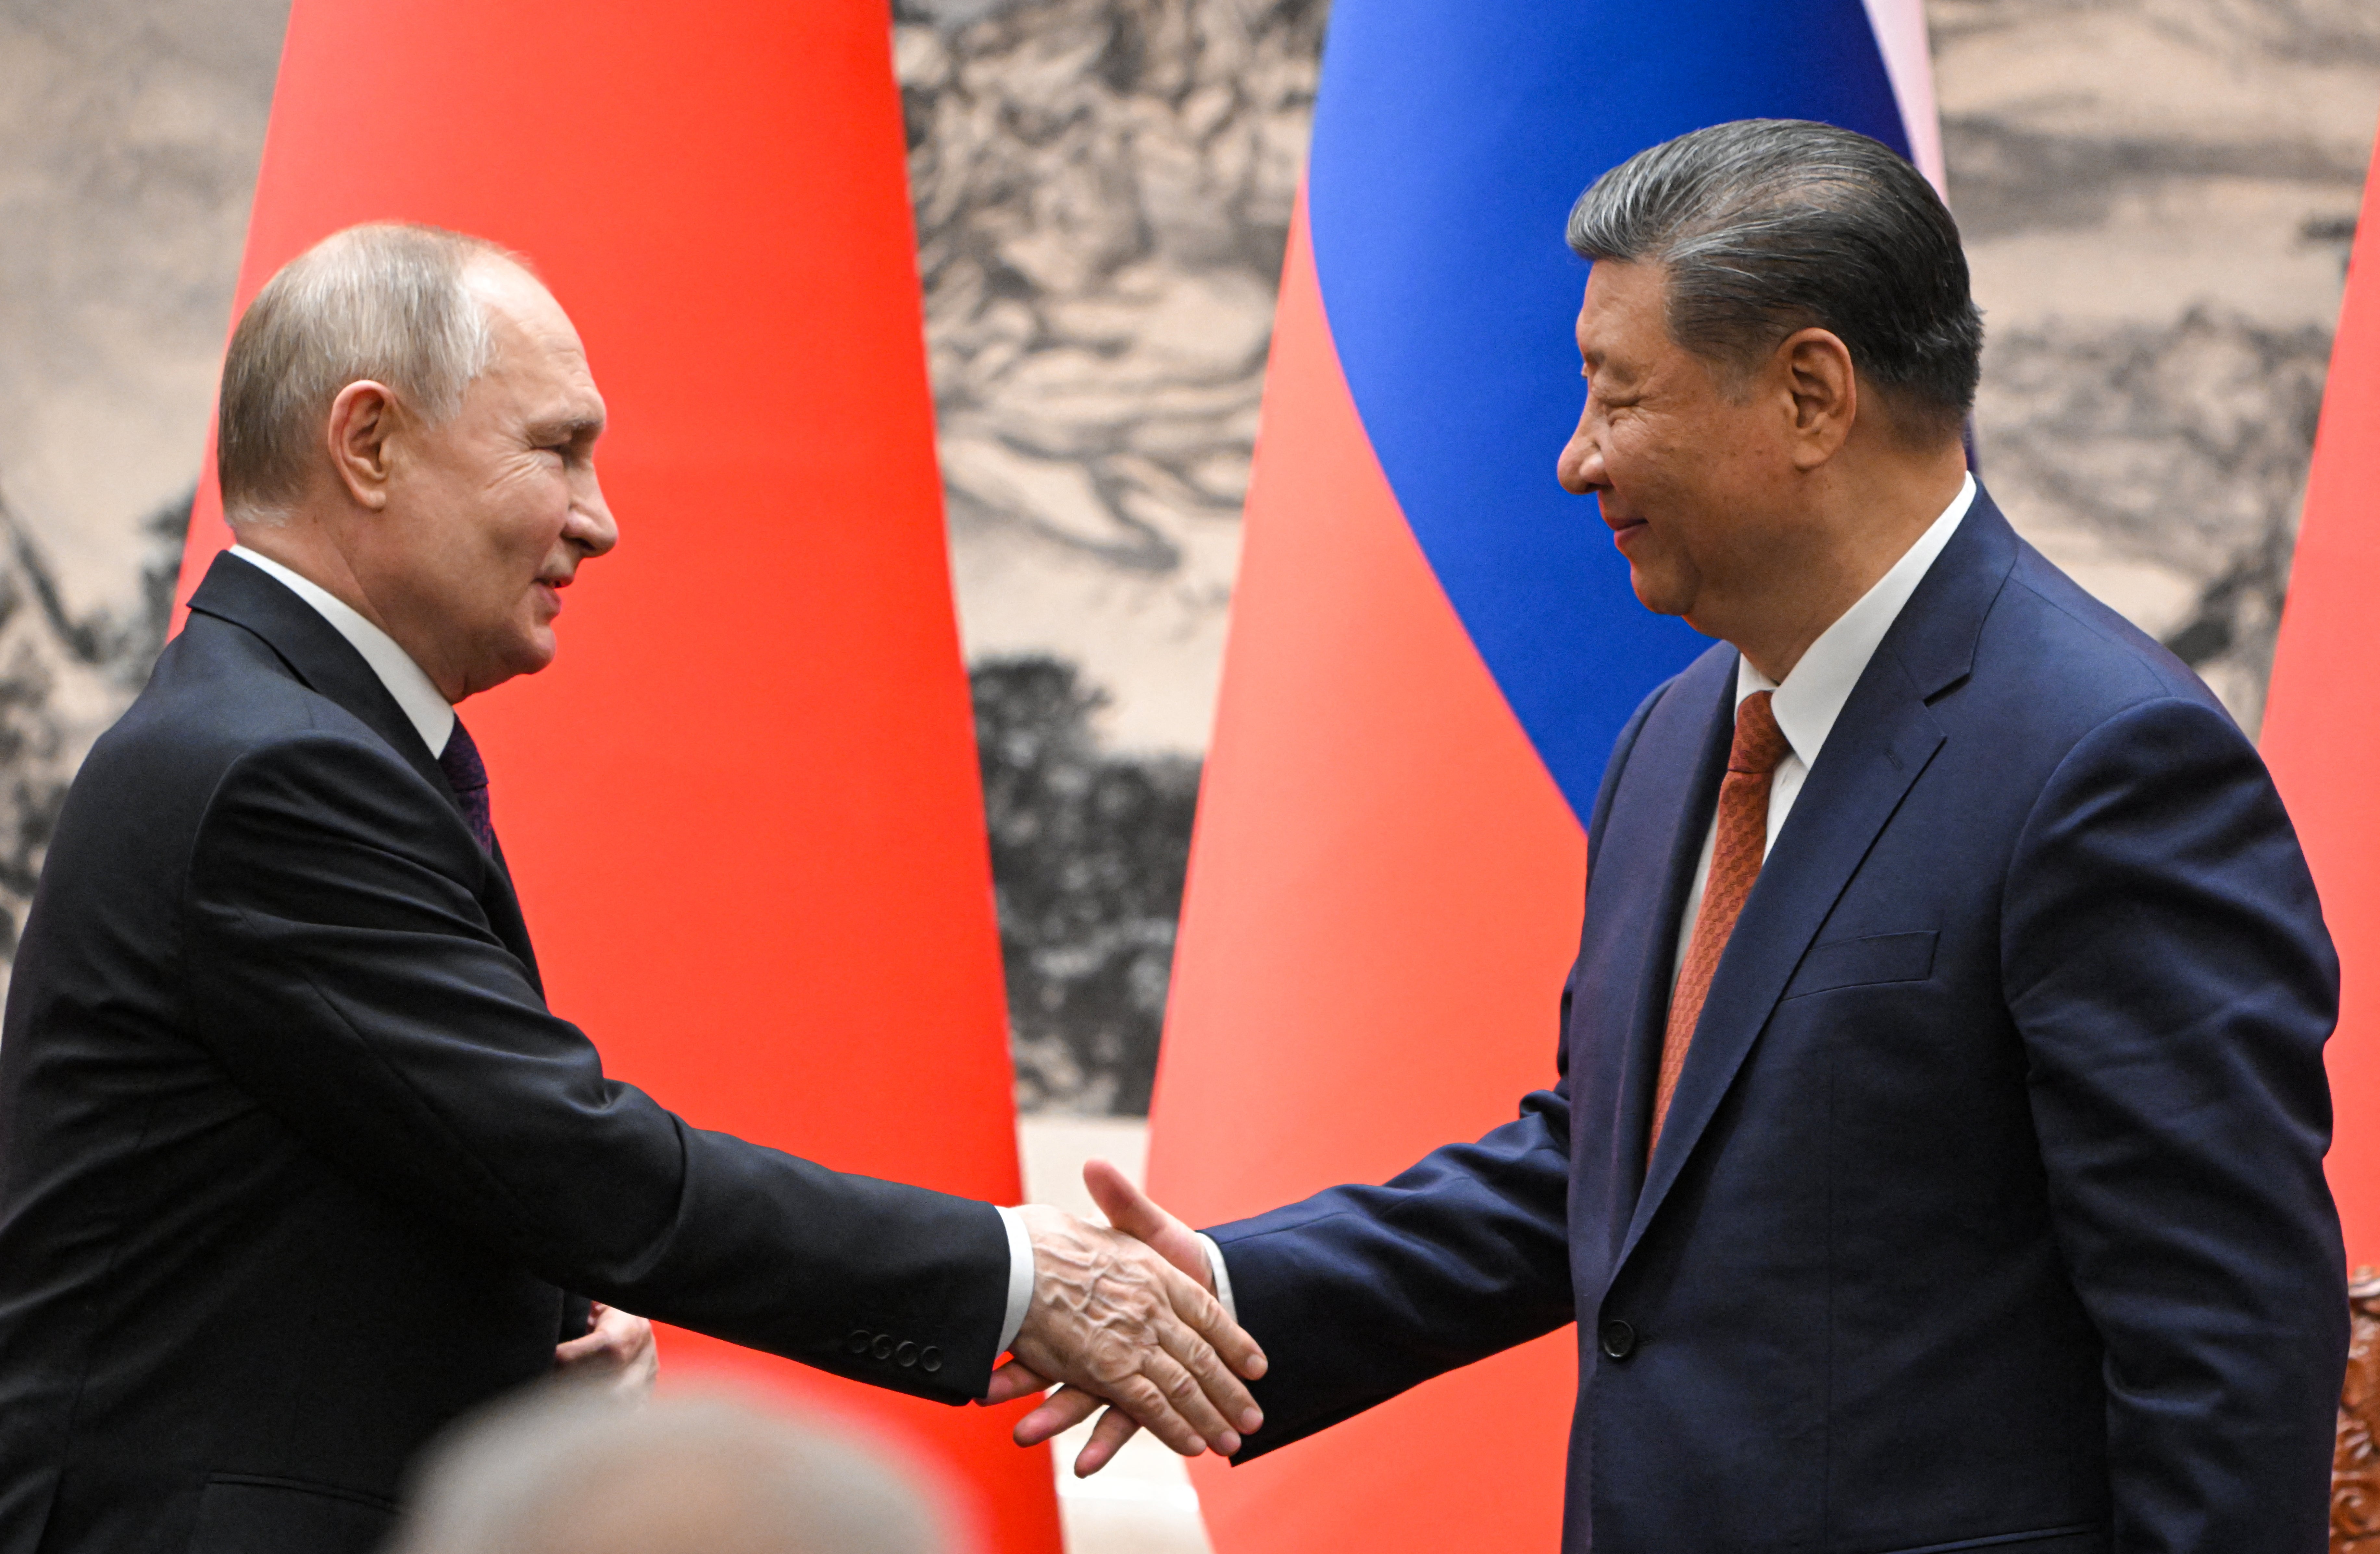 Vladimir Putin and Xi Jinping shake hands for the cameras following their talks in Beijing on Thursday